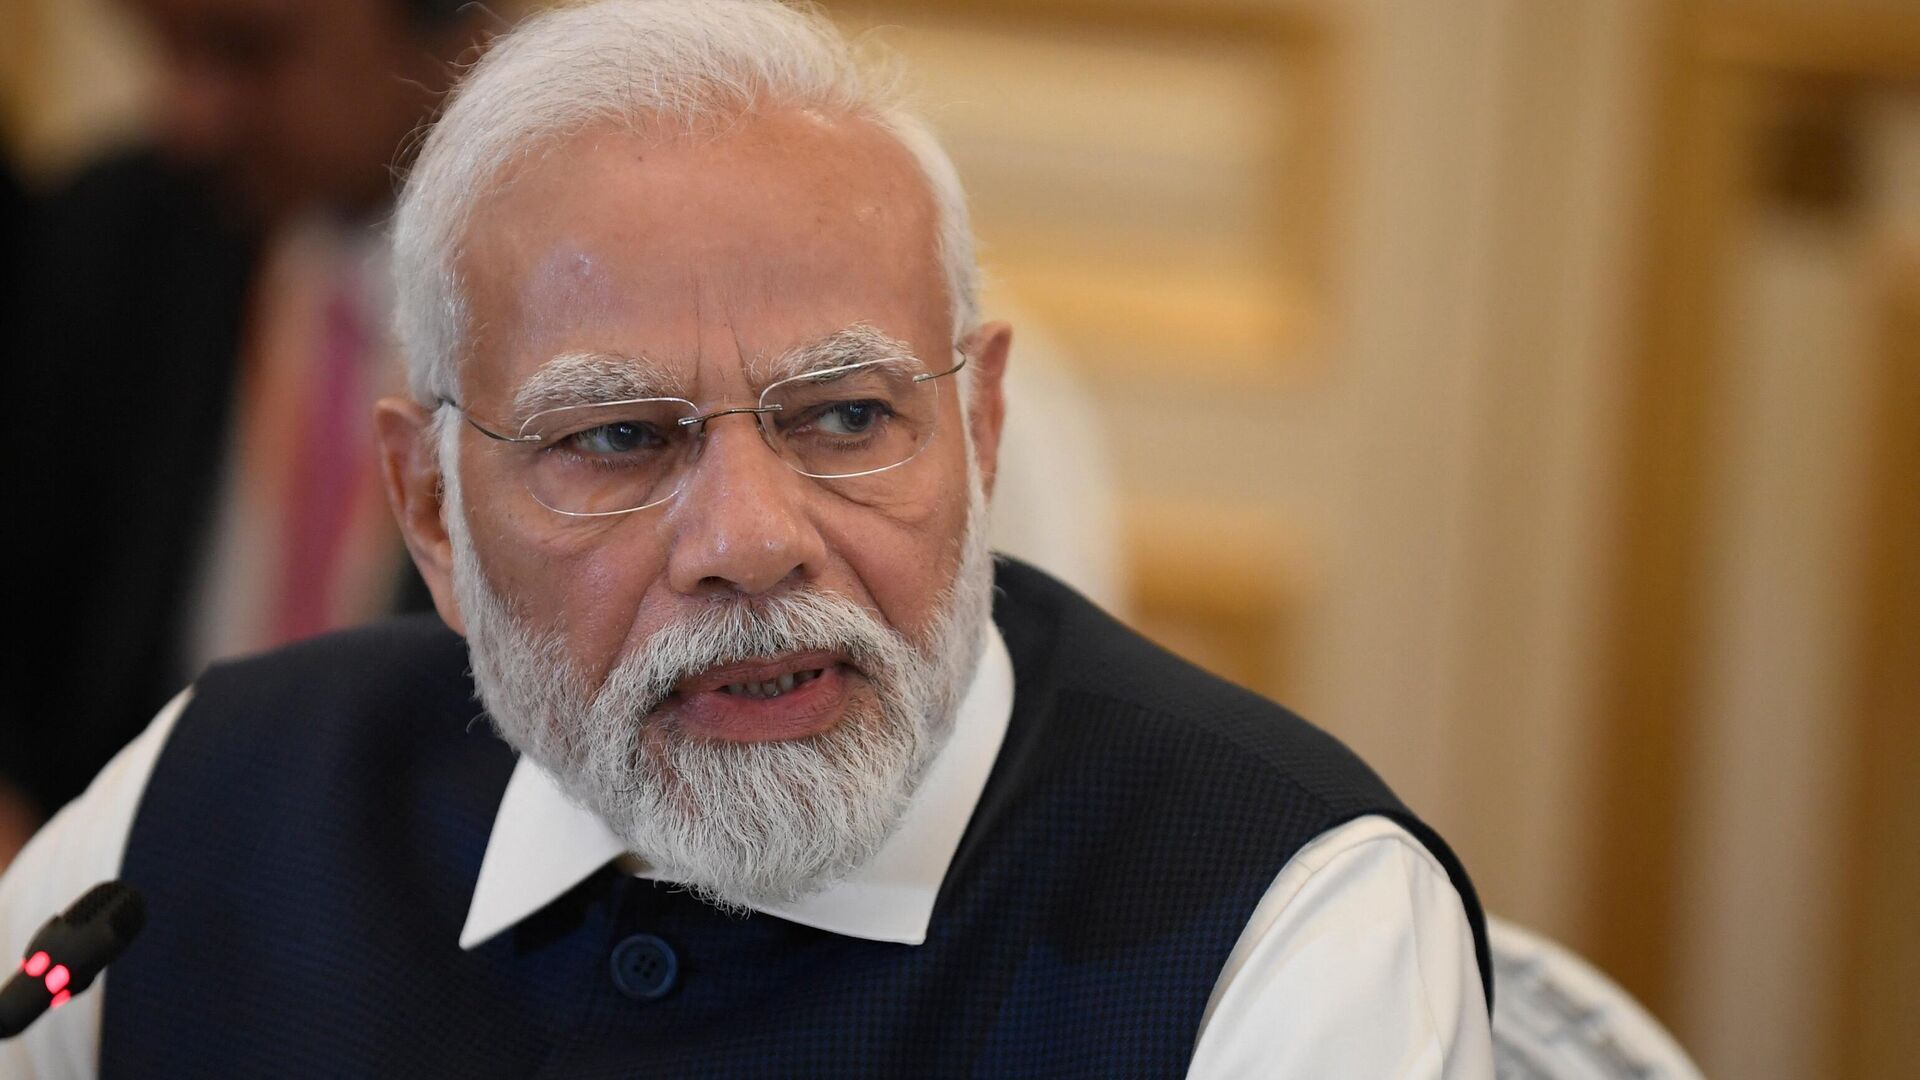 PM Modi Slams Congress and INDIA Bloc for Systematic Plunder